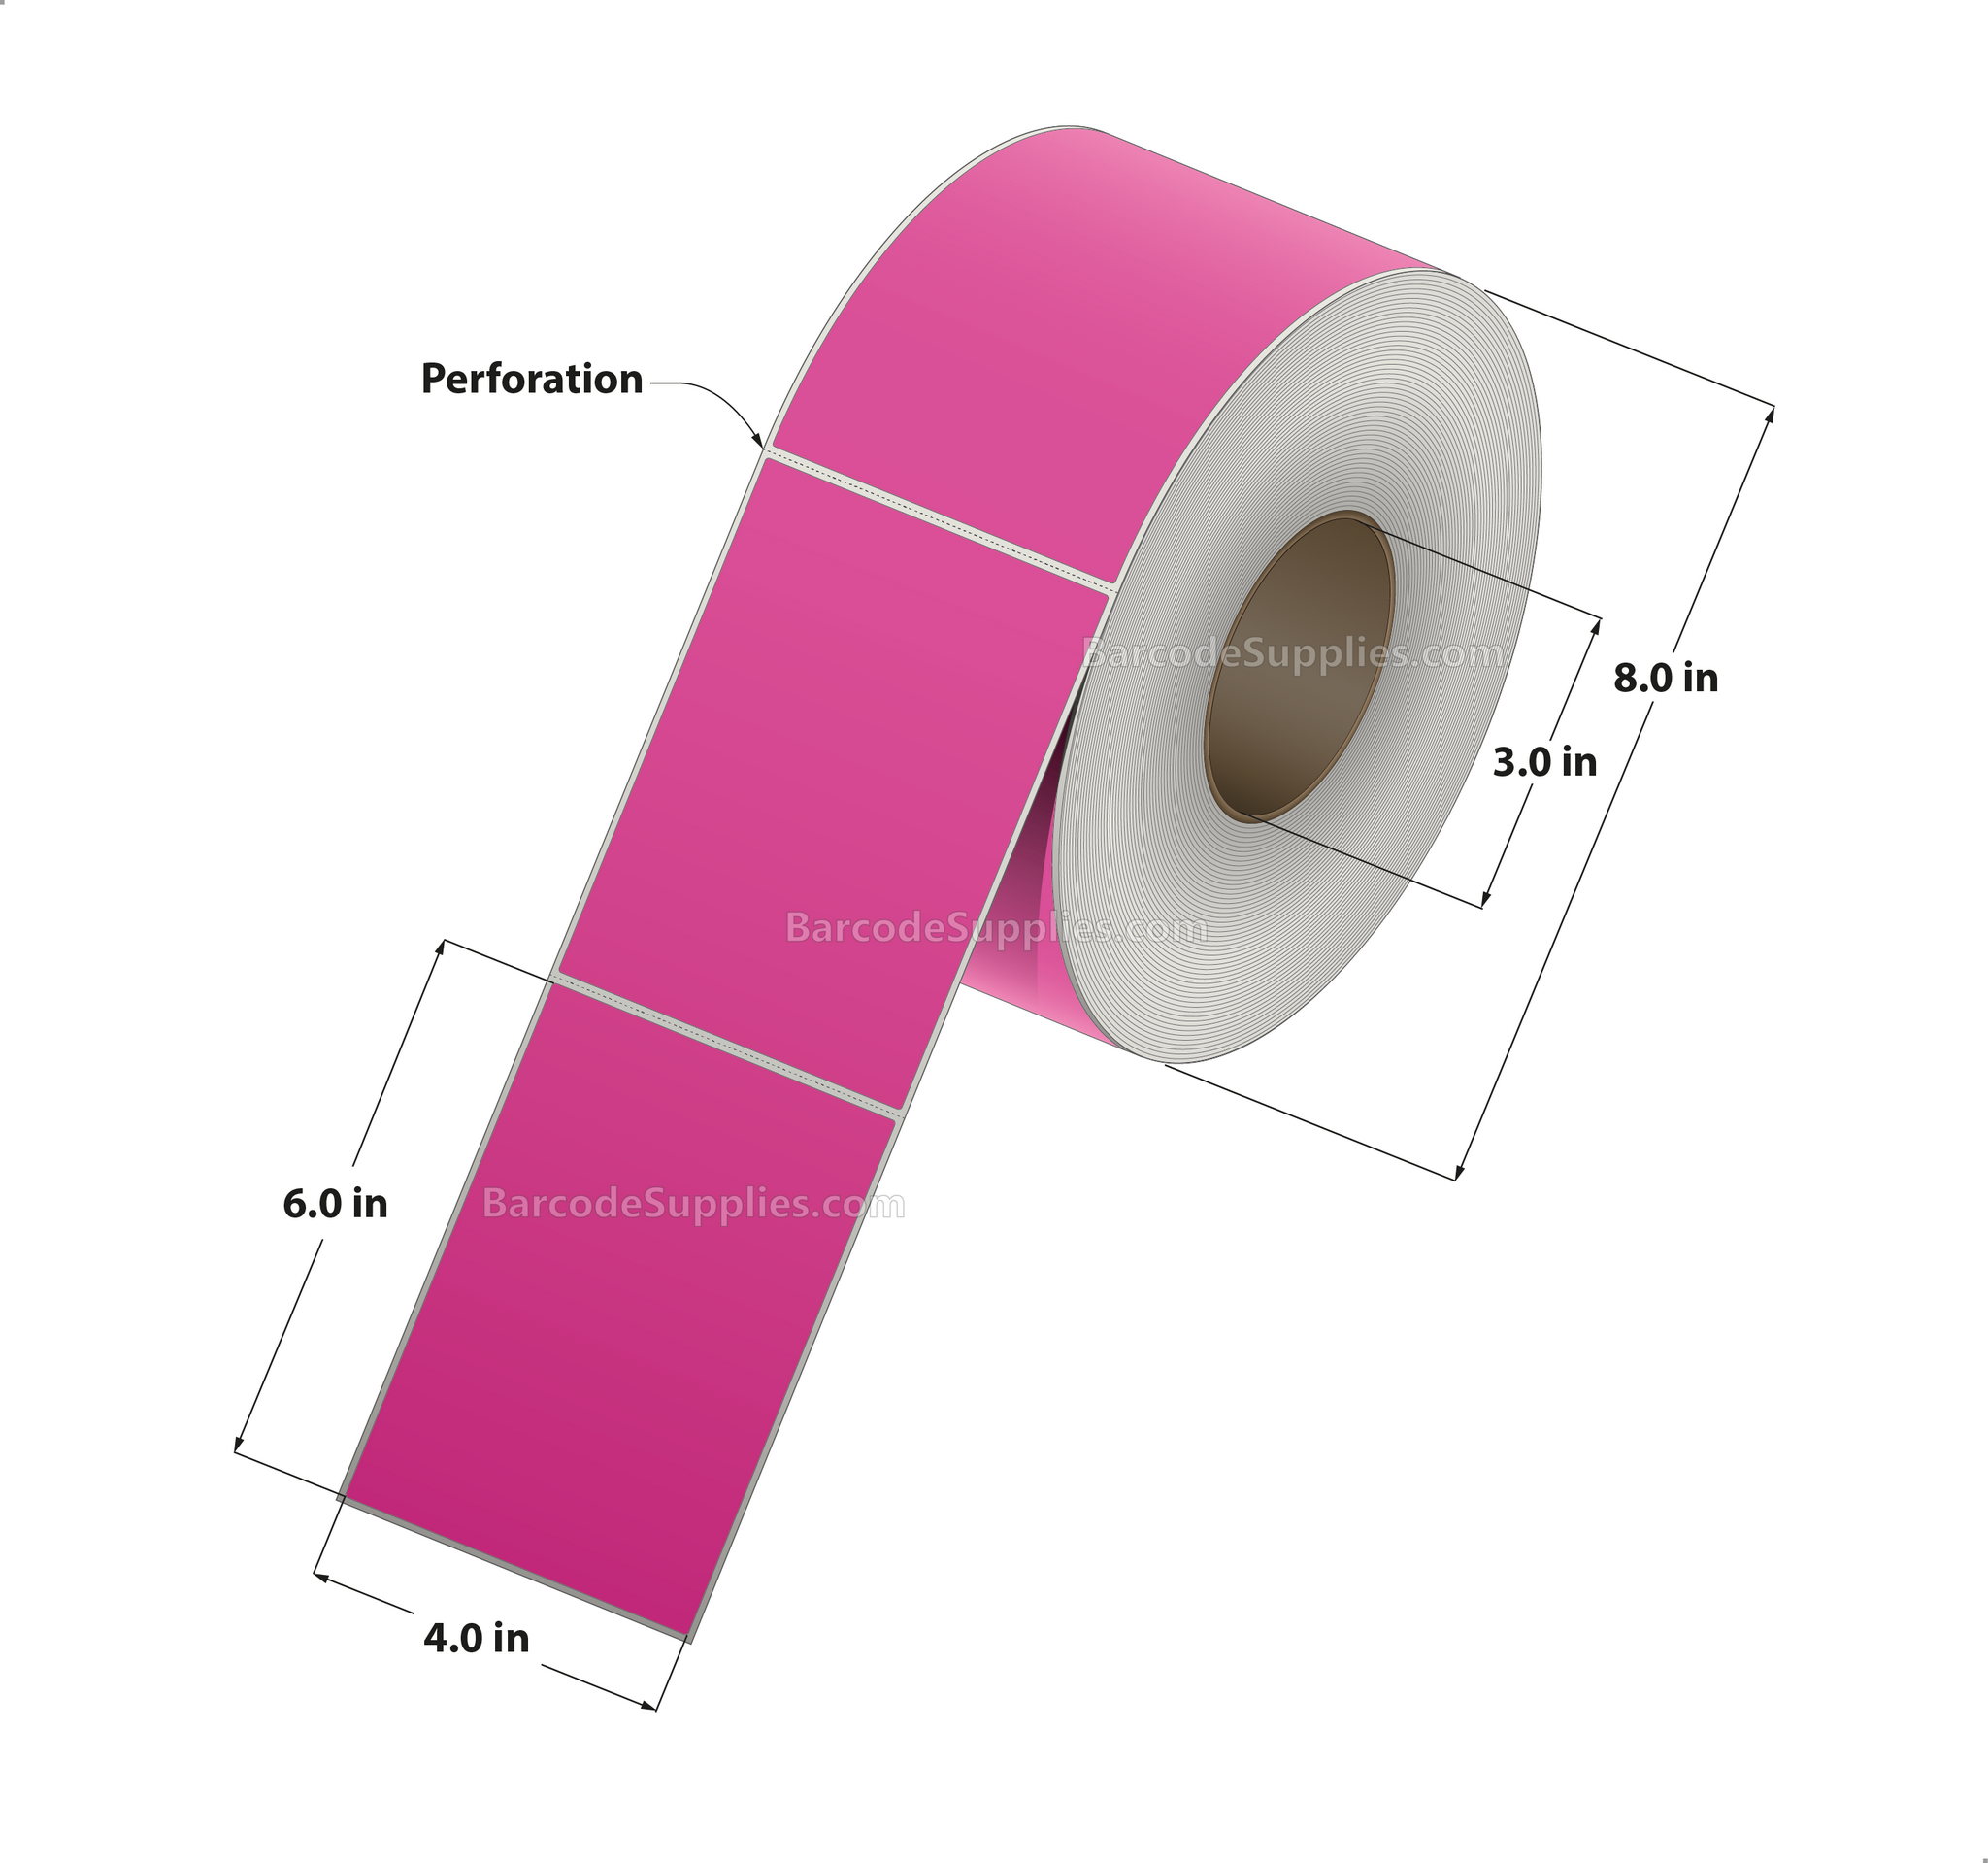 4 x 6 Thermal Transfer Fluorescent 806 Pink Labels With Permanent Adhesive - Perforated - 1000 Labels Per Roll - Carton Of 4 Rolls - 4000 Labels Total - MPN: FL-4-6-1000-PK